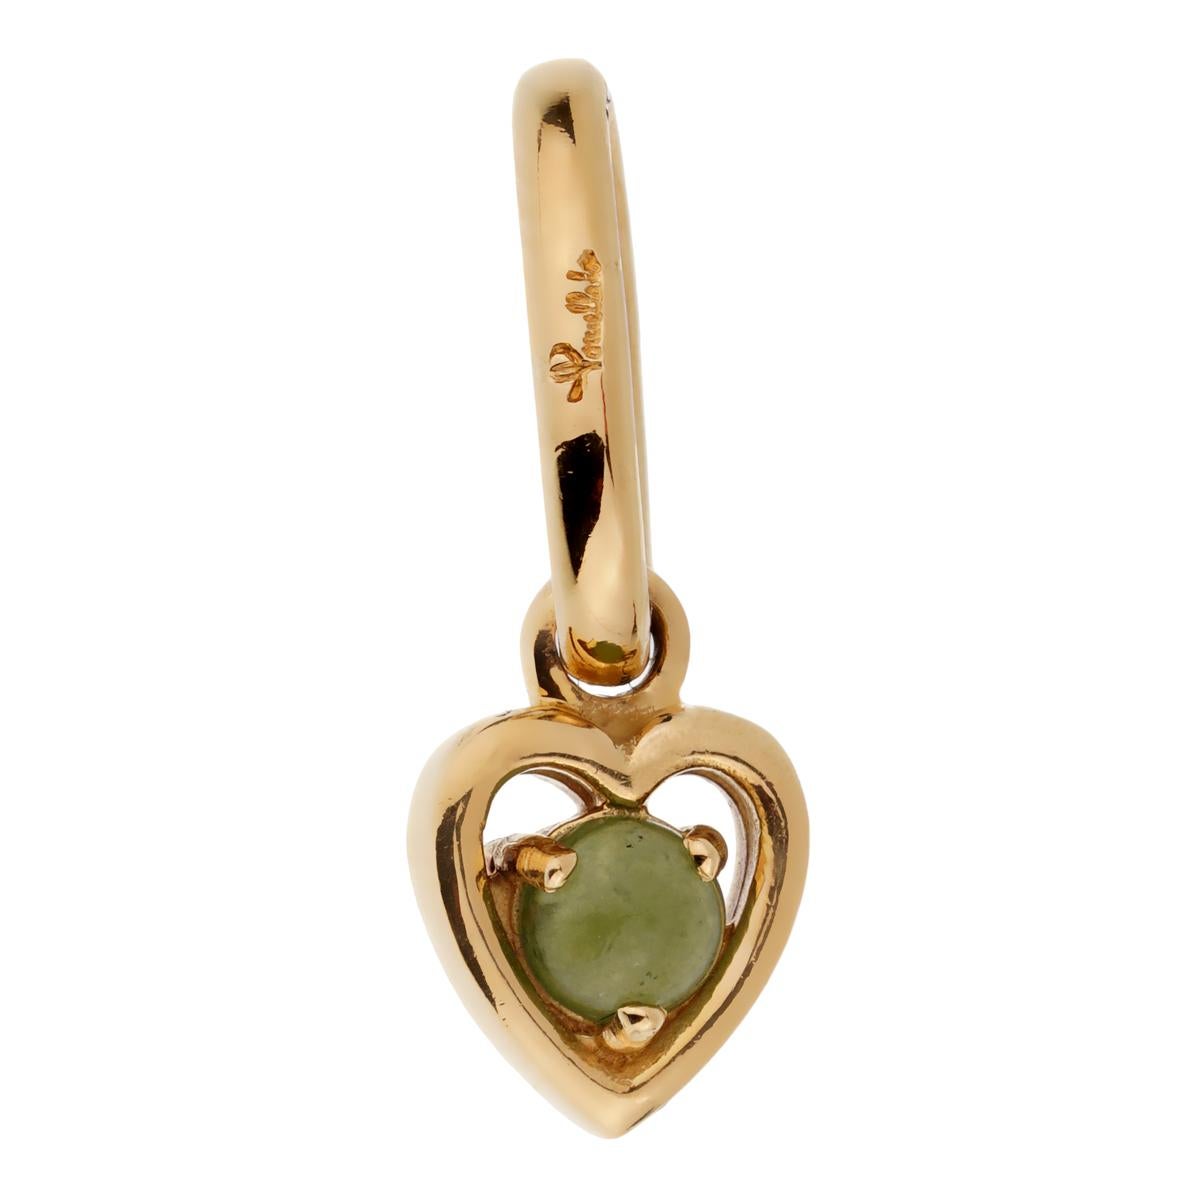 A chic brand new Pomellato charm pendant featuring a .35ct Green Chalcedony set in 18k yellow gold. 

Sku: 2299